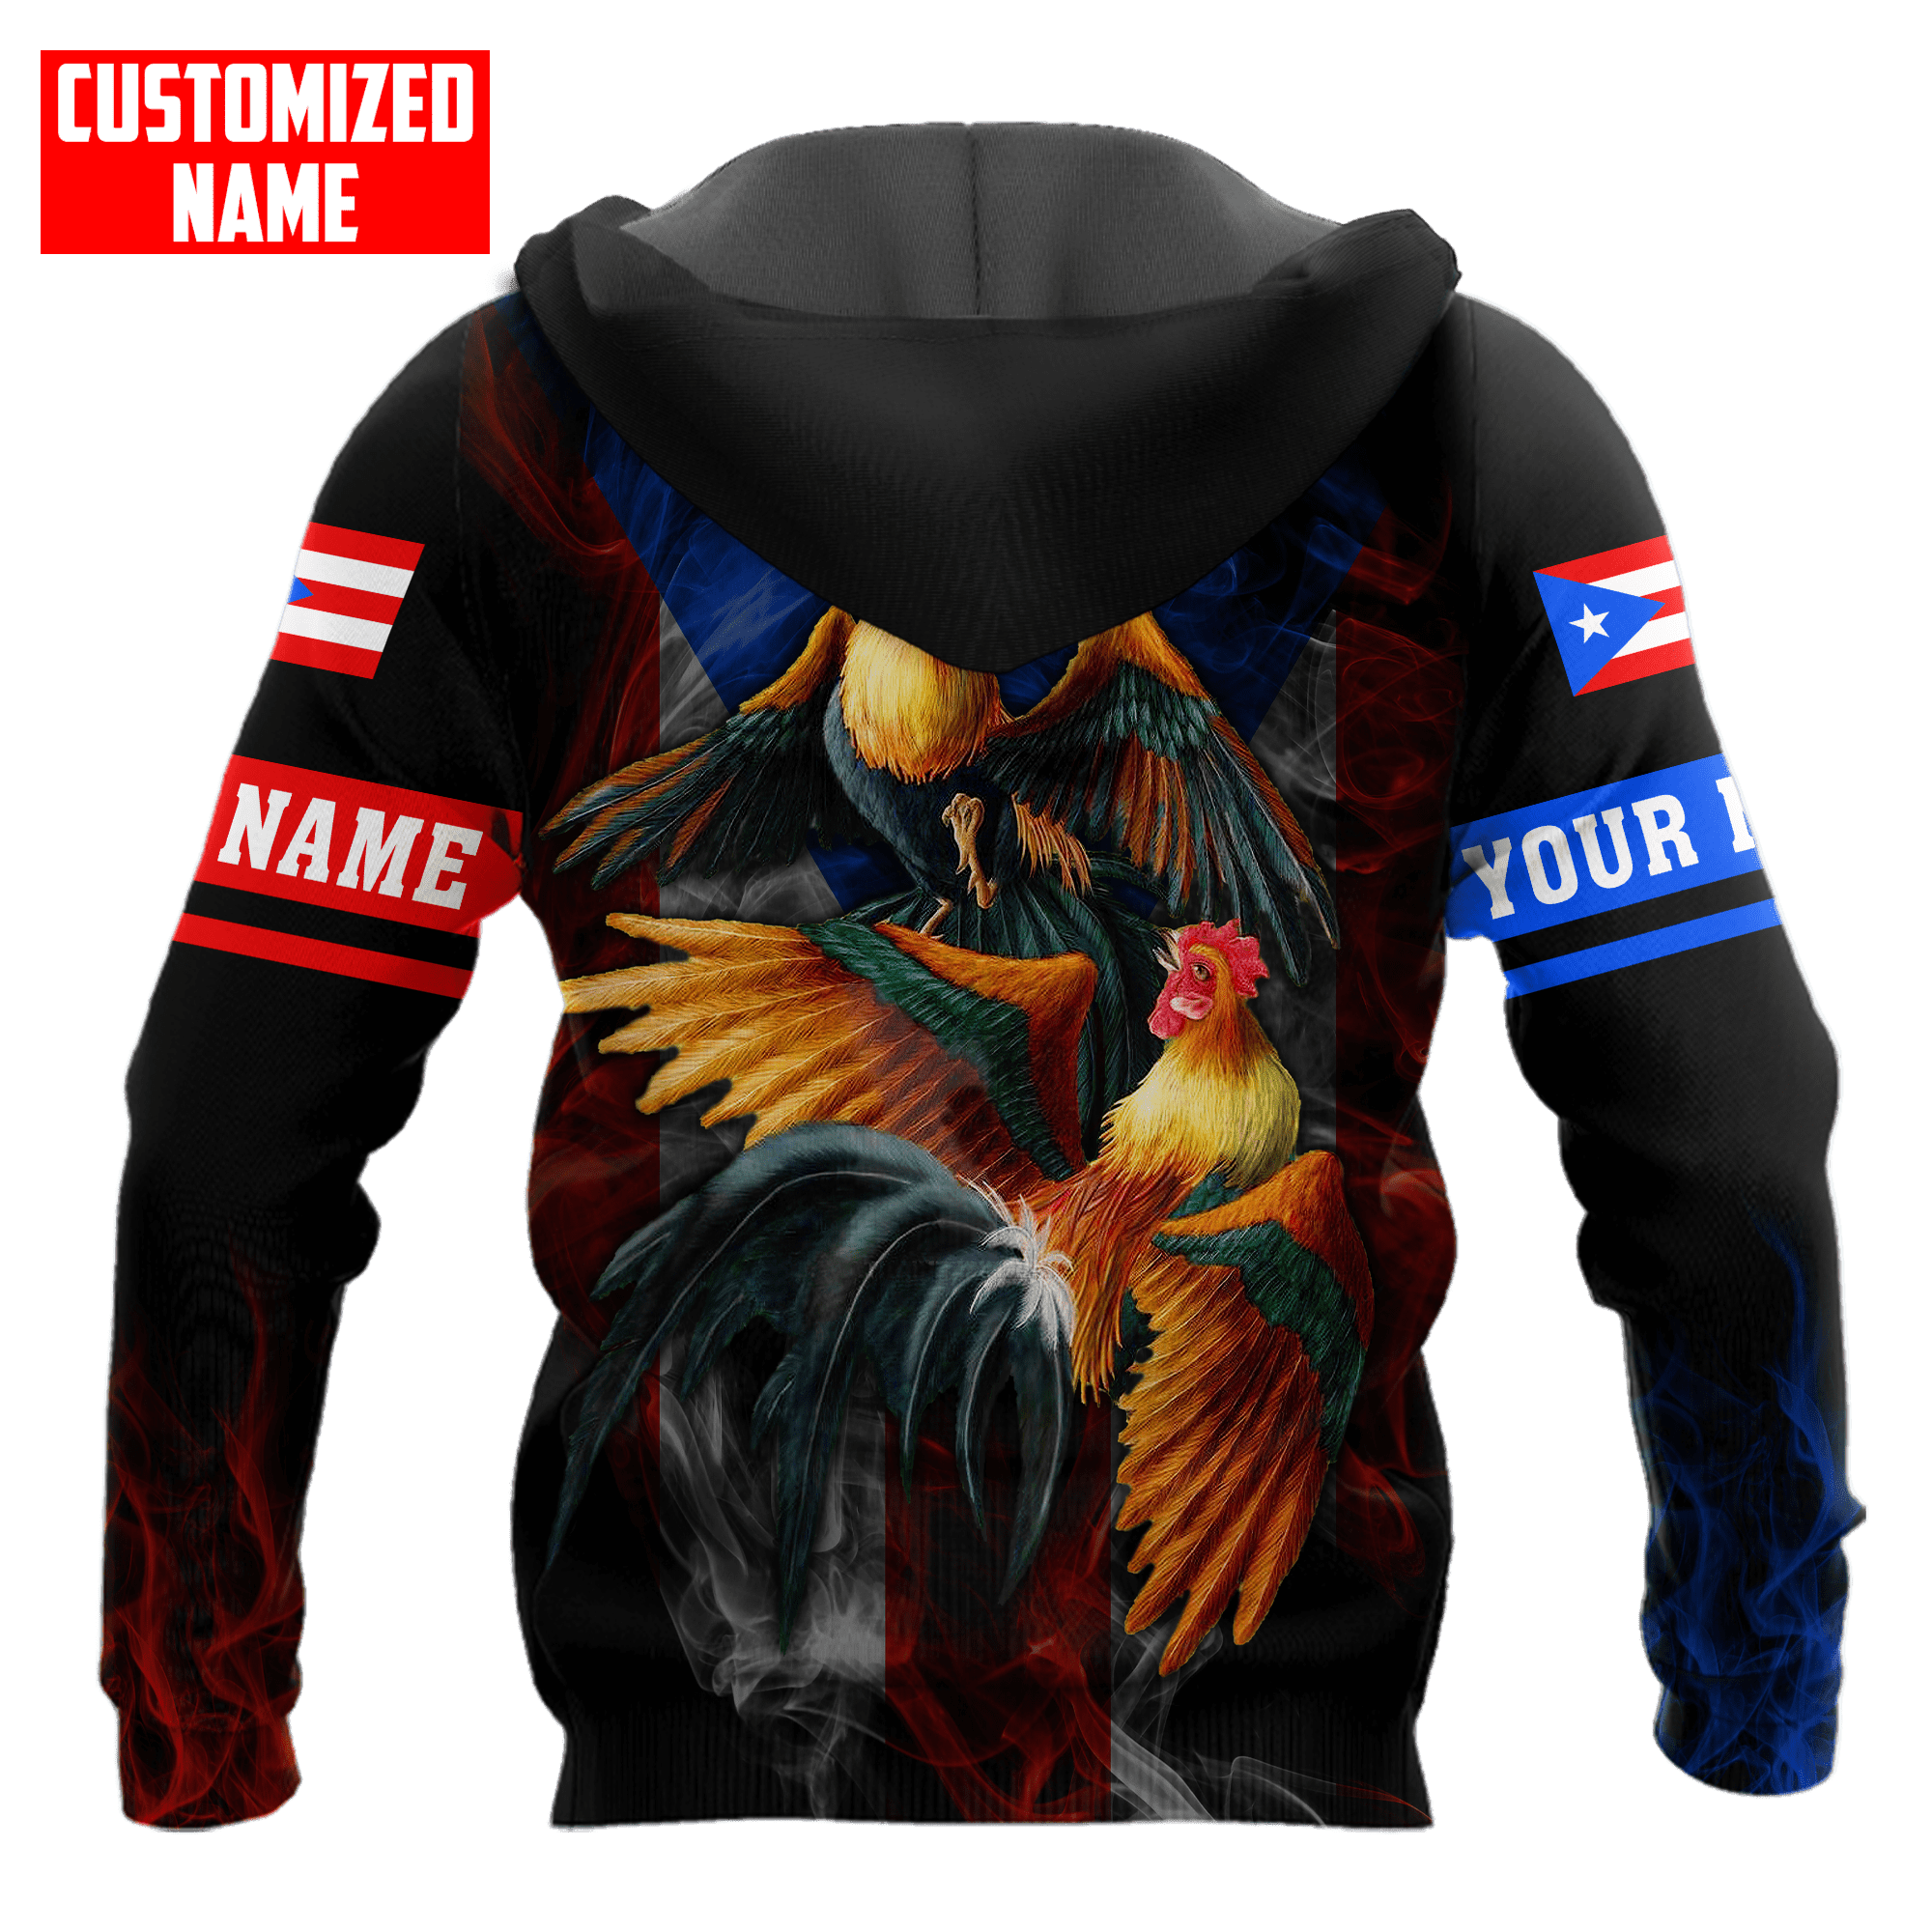 Coolspod Personalized Name Gallero De Puerto Rico All Over Printed Hoodie Shirts/ Rooster Shirt